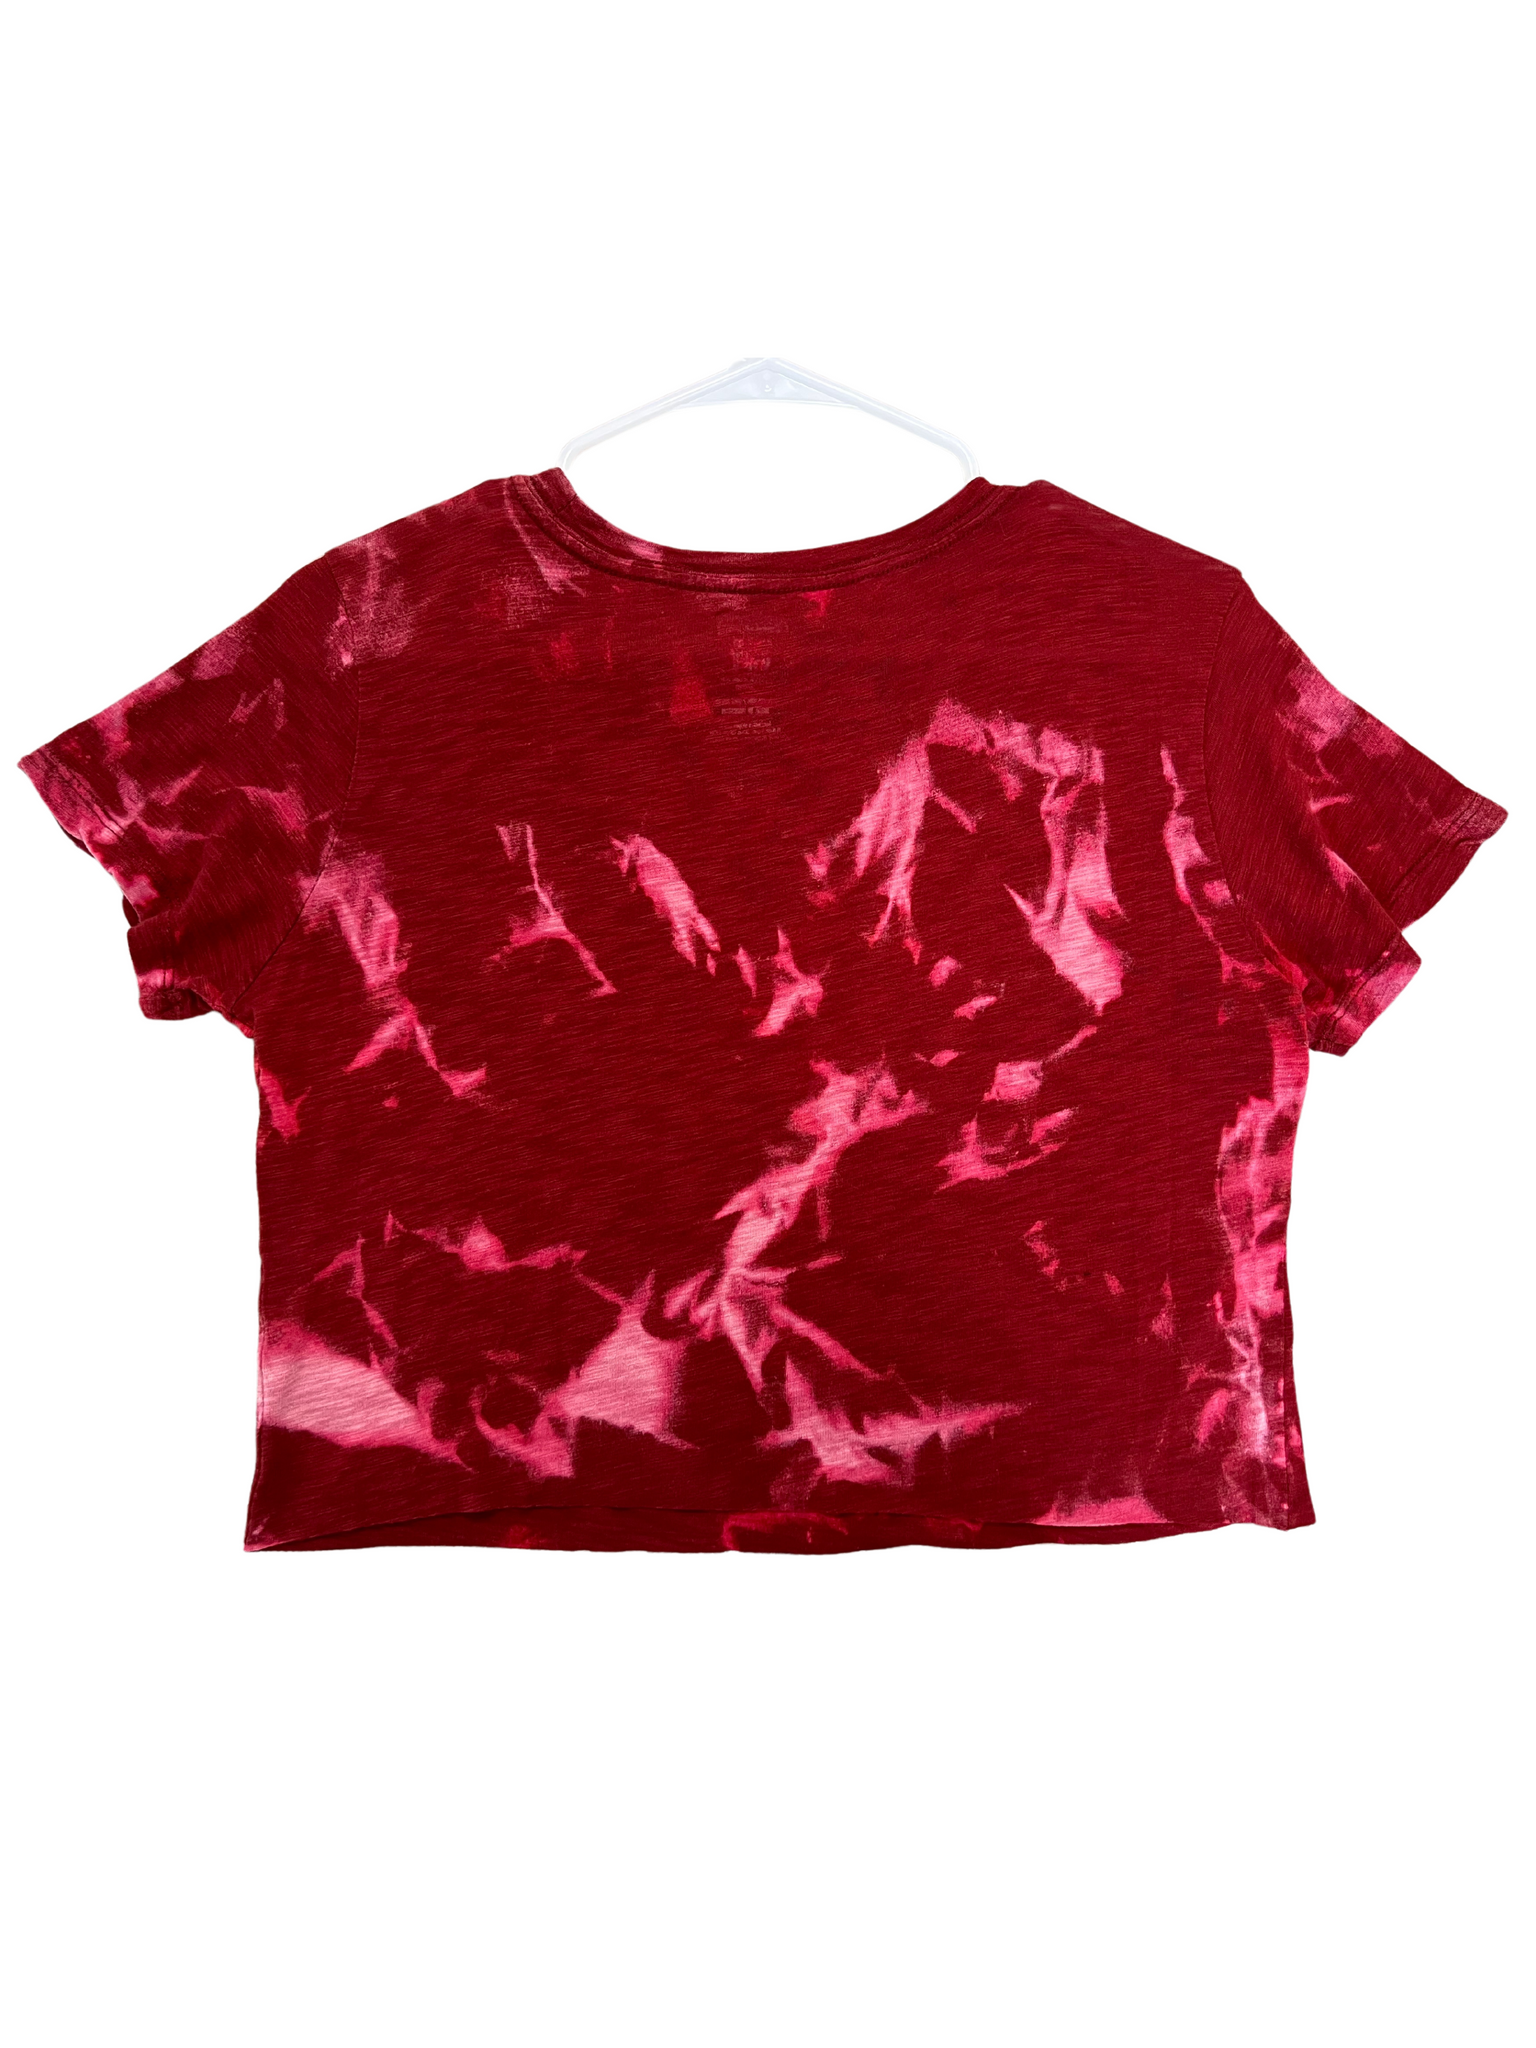 Iowa State Cropped & Bleached Shirt